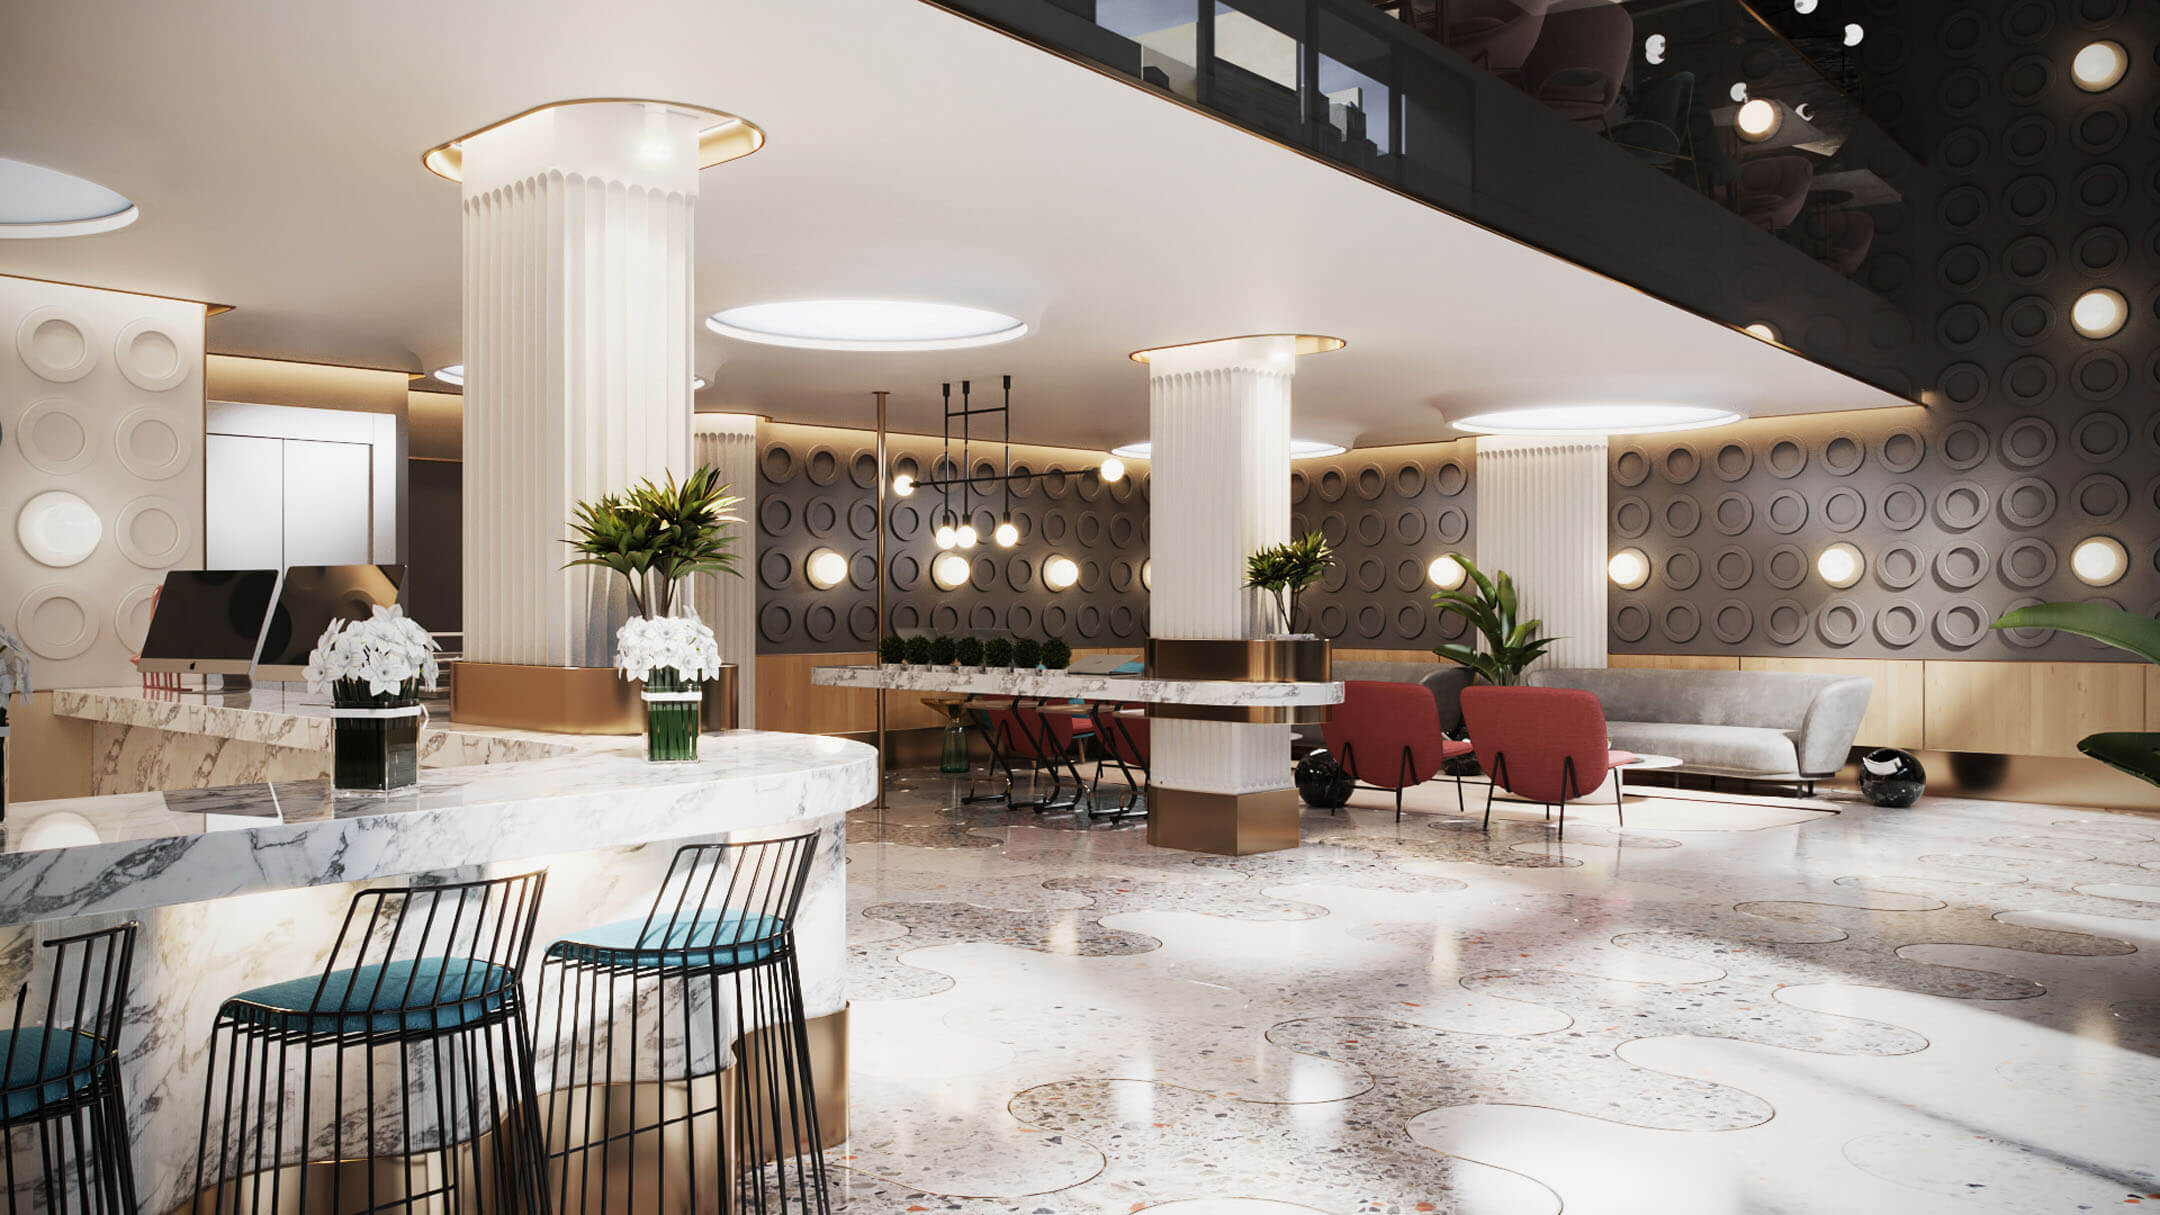 3D Visualization of a Spacious Modern Hotel Lobby